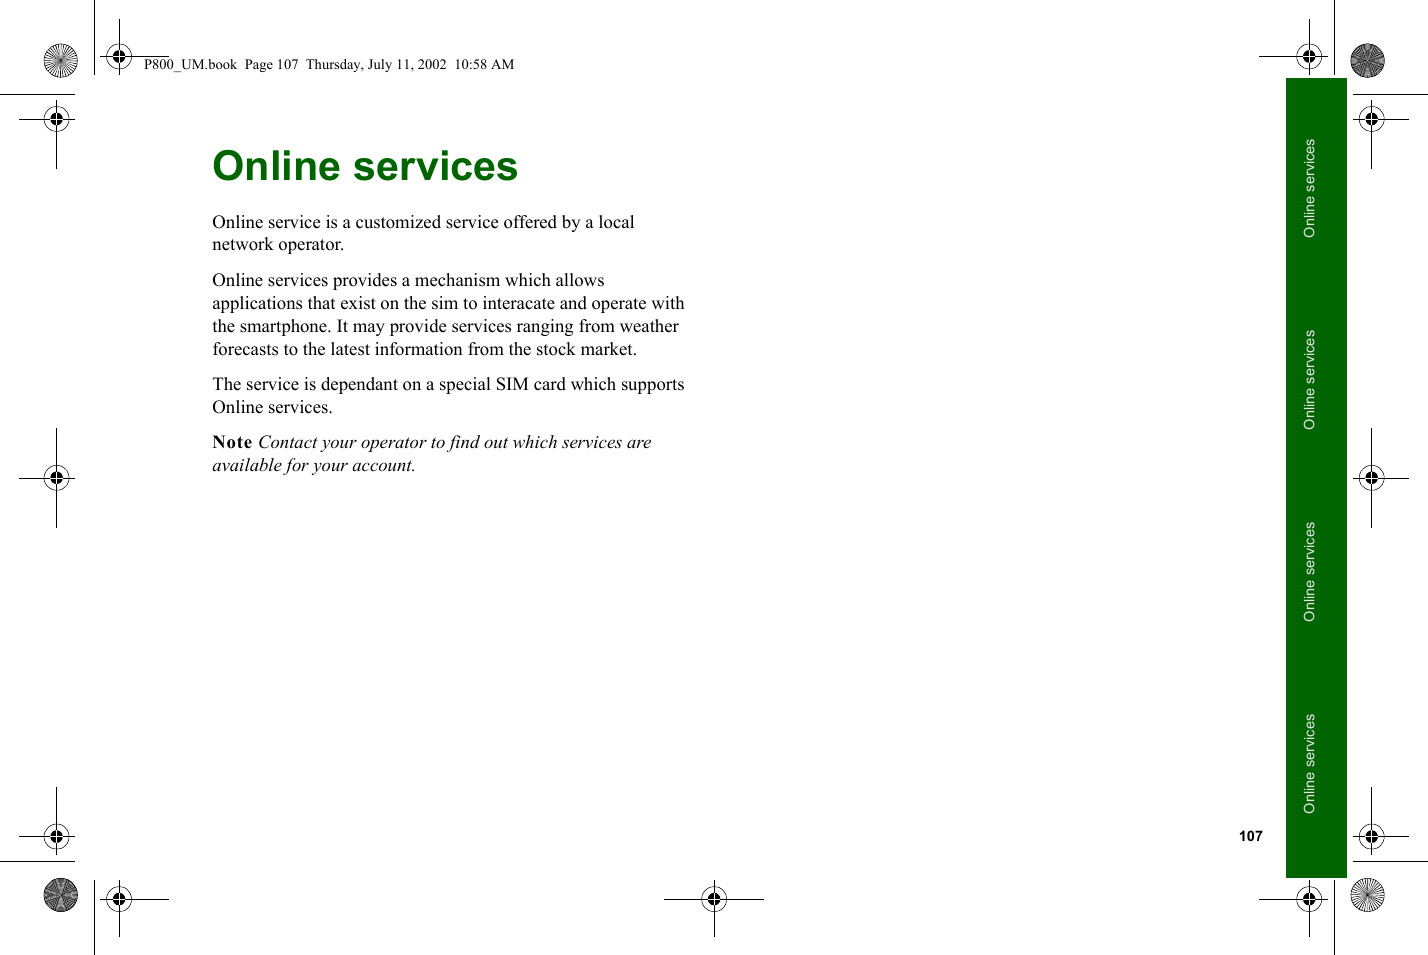 107Online servicesOnline servicesOnline servicesOnline servicesOnline servicesOnline service is a customized service offered by a local network operator. Online services provides a mechanism which allows applications that exist on the sim to interacate and operate with the smartphone. It may provide services ranging from weather forecasts to the latest information from the stock market. The service is dependant on a special SIM card which supports Online services. Note Contact your operator to find out which services are available for your account.P800_UM.book  Page 107  Thursday, July 11, 2002  10:58 AM